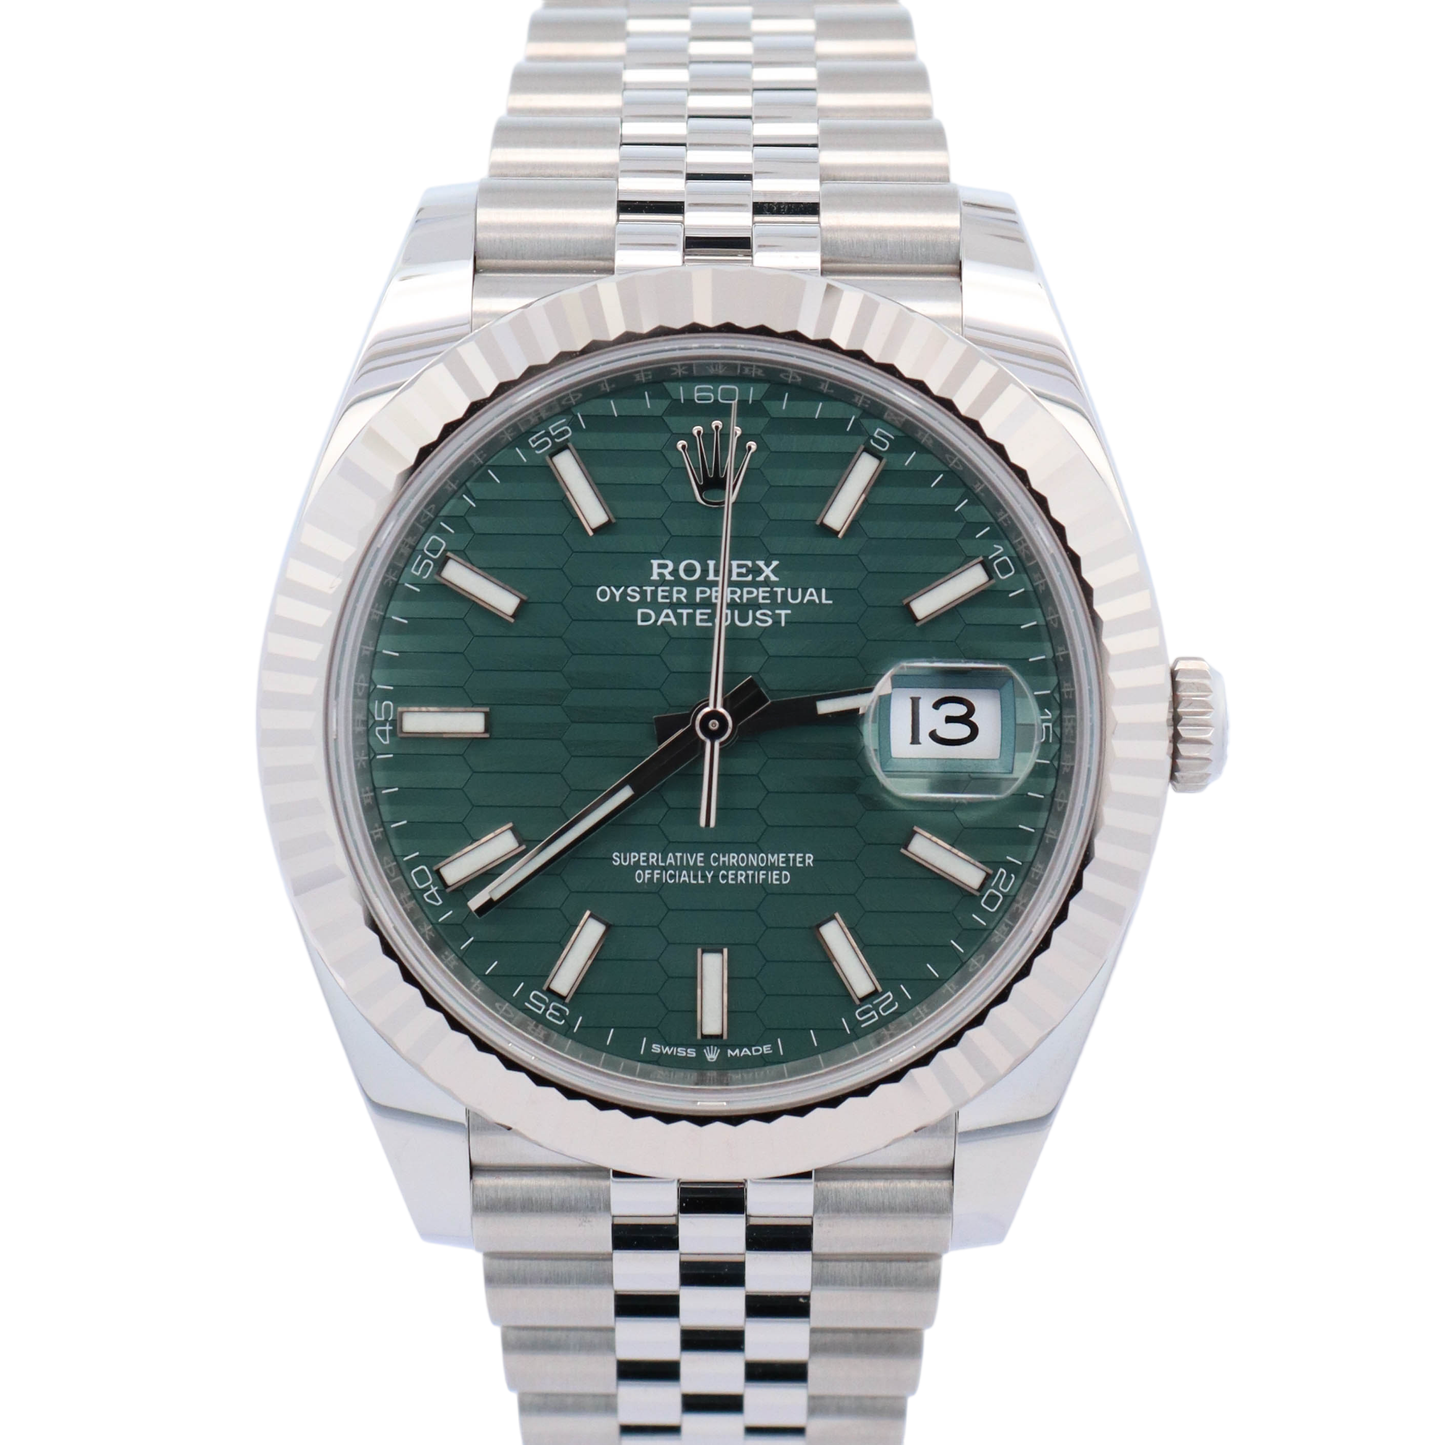 Rolex Datejust 41 Stainless Steel Mint Green Fluted Motiff Dial Watch Reference# 126334 - Happy Jewelers Fine Jewelry Lifetime Warranty